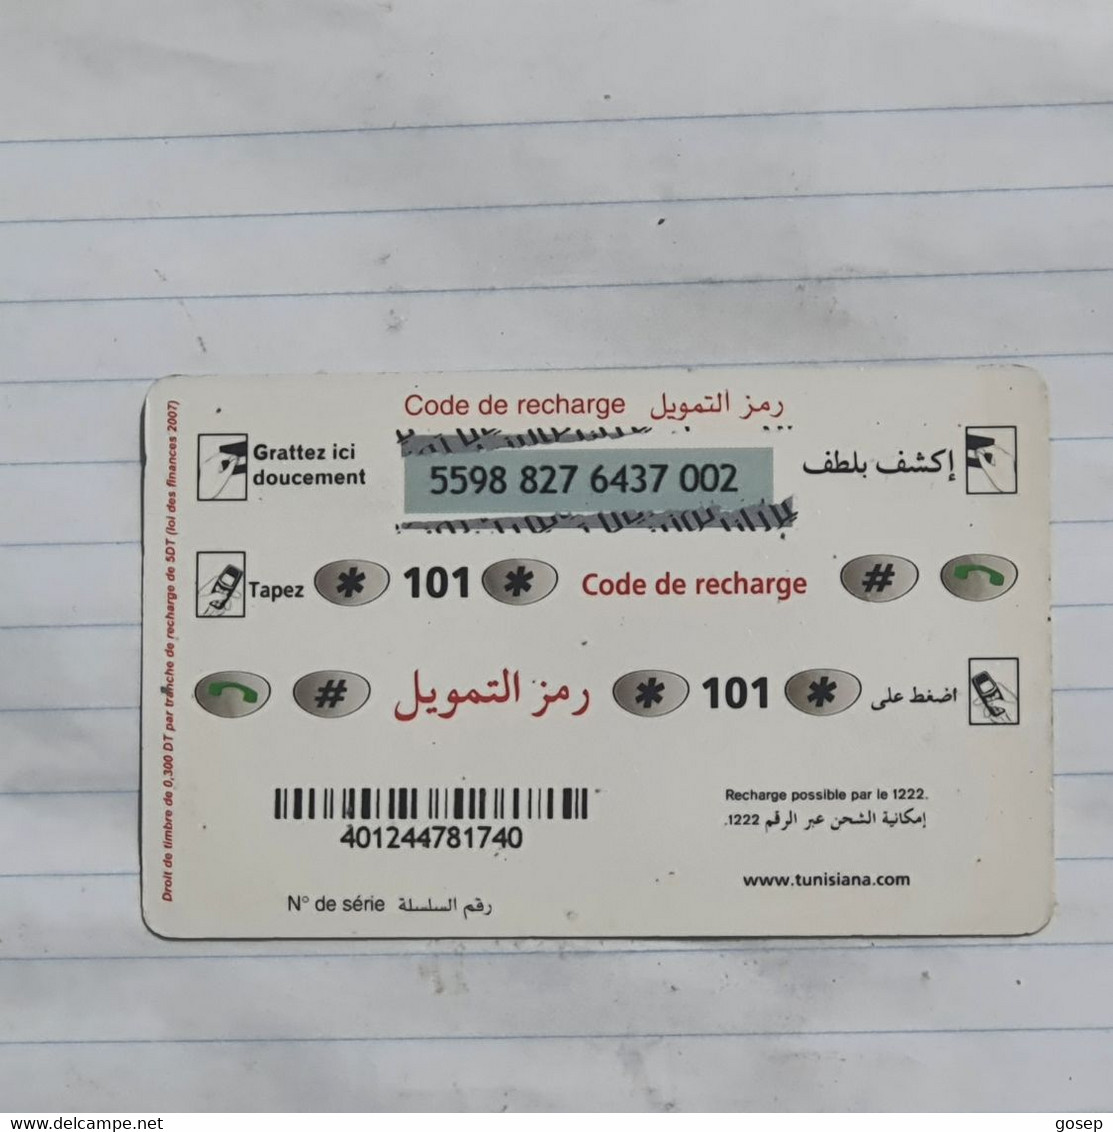 TUNISIA-(TUN-REF-TUN-25)-Chanteuse-(152)-(5598-827-6437-002)-(look From Out Side Card Barcode)-used Card - Tunisie